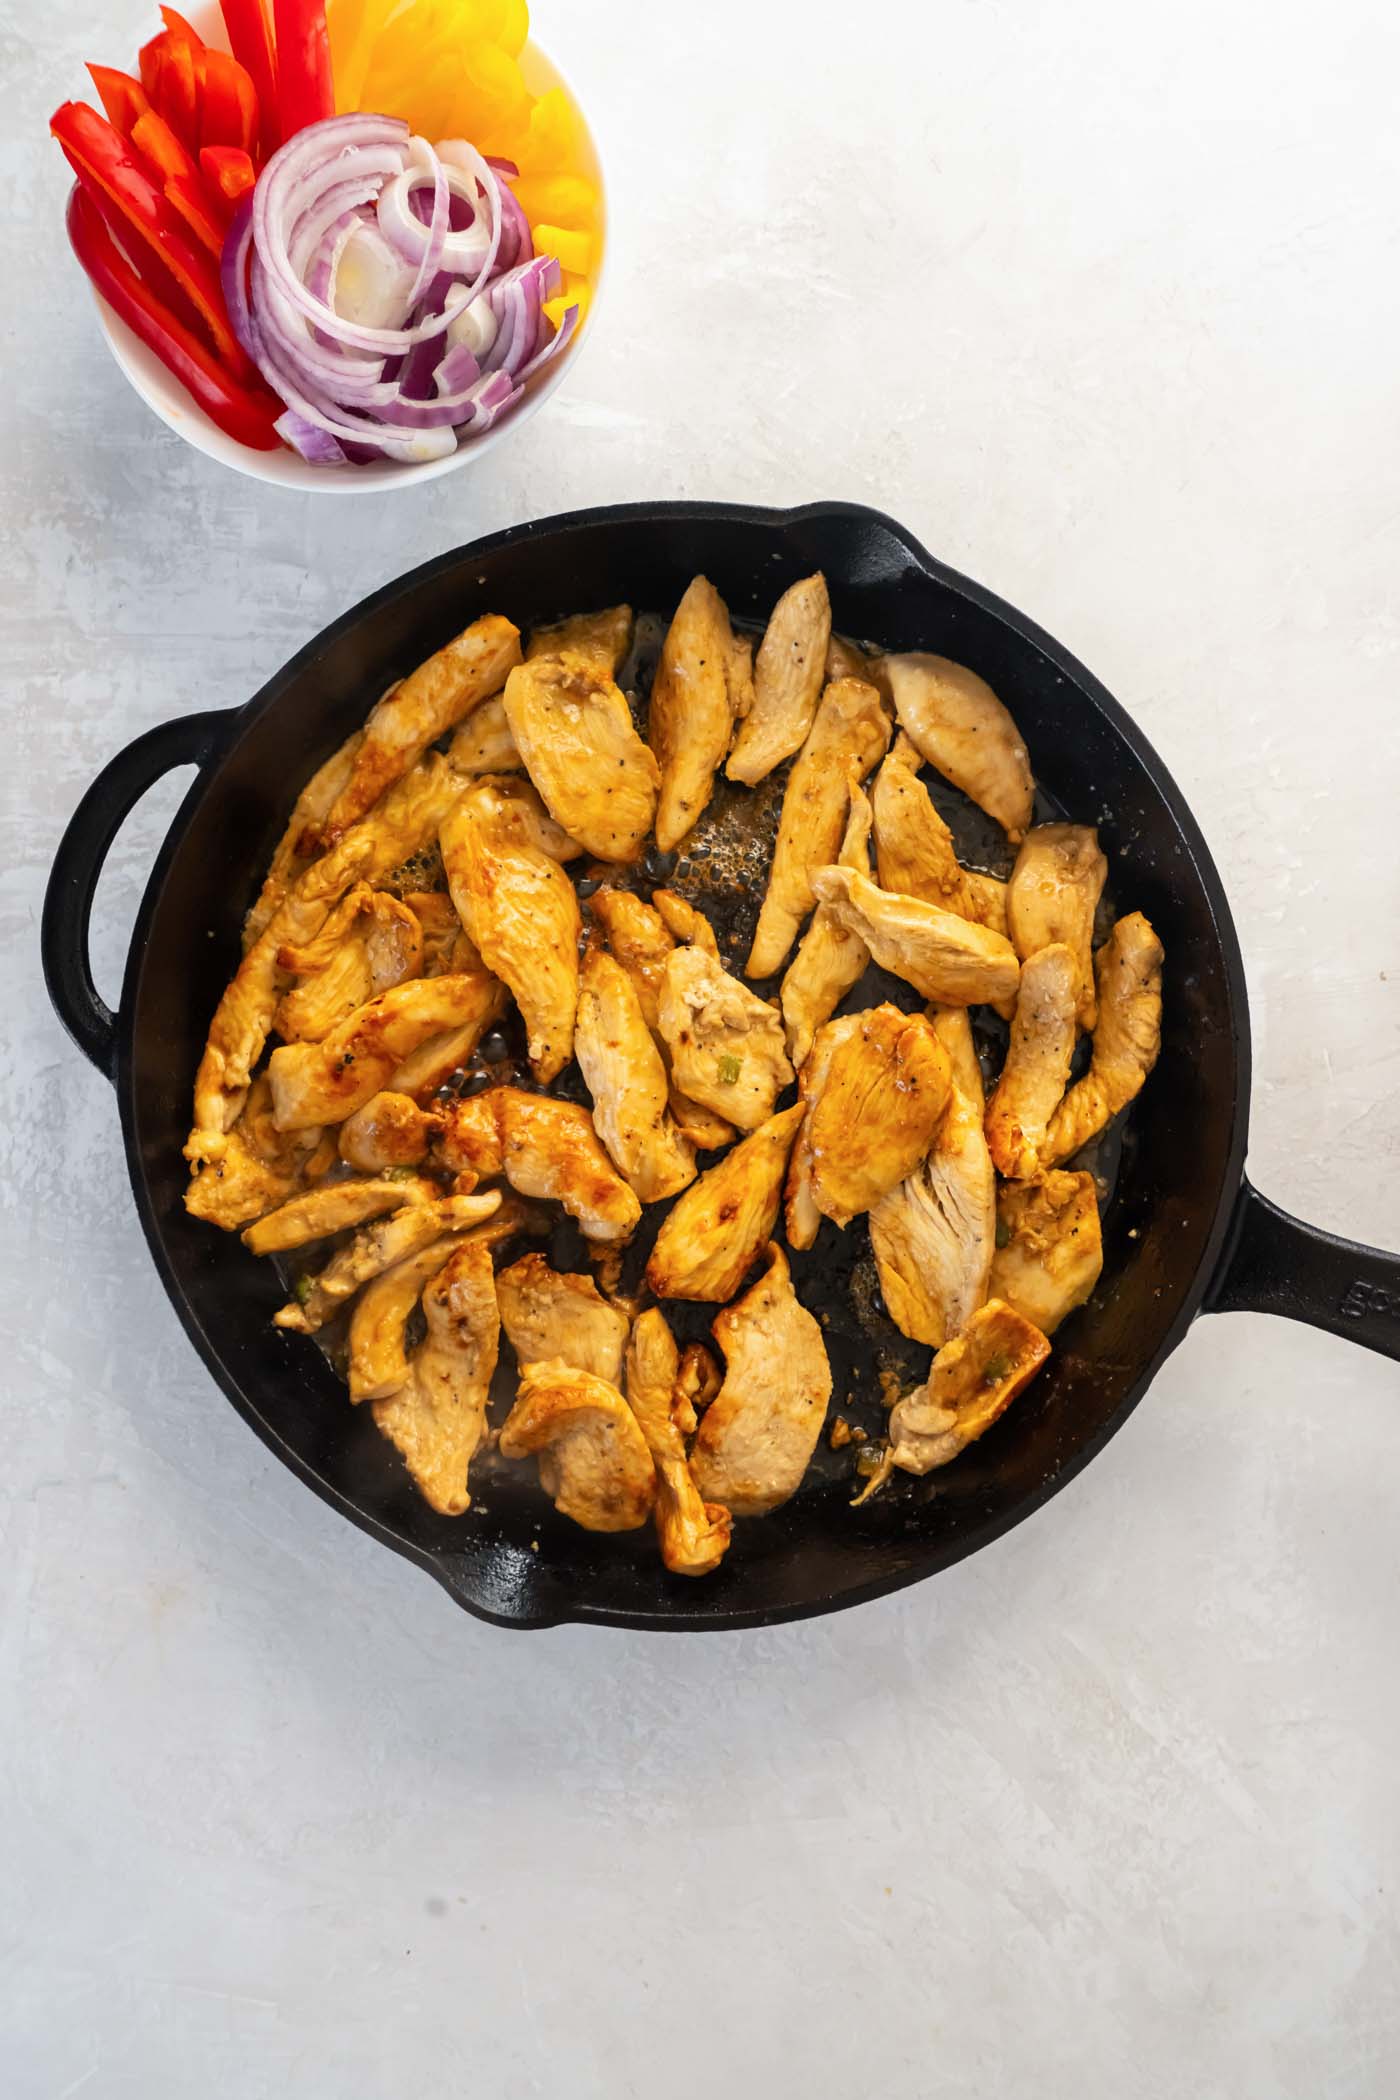 Cooking marinated chicken pieces in a cast iron skillet.